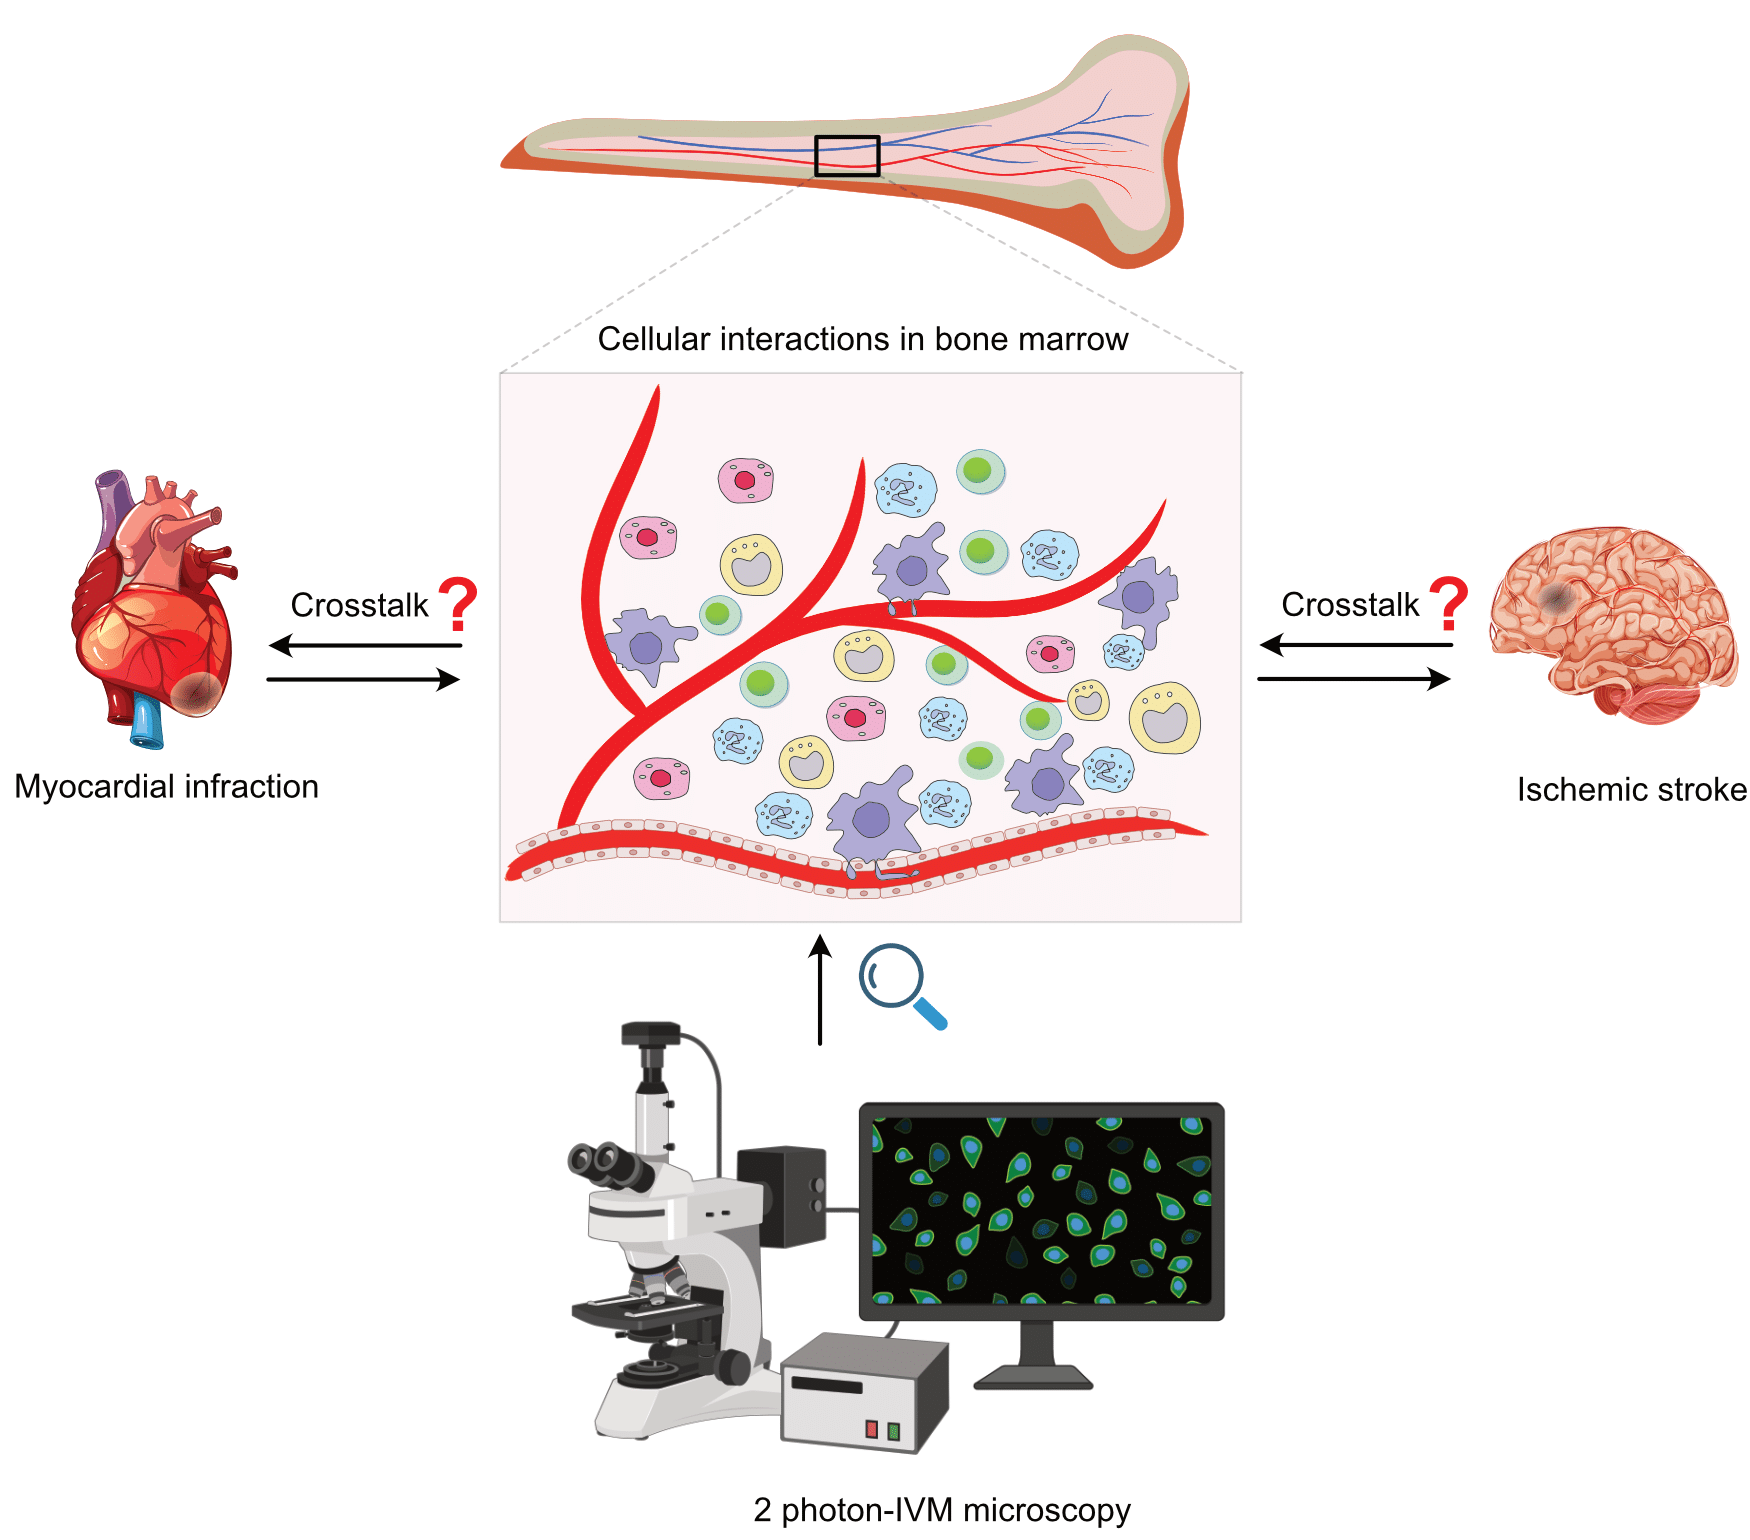 The cartoon shows a schematic bone on the top with a zoom-in displaying various cells within the bone marrow and in close contact with the vasculature. On the left-hand side of this zoom-in a heart is depicted, which is labeled with myocardial infarction, next to a double-headed arrow and “crosstalk ?”. On the right-hand side of the zoom-in another double-headed arrow and “crosstalk ?” leads to a brain with a grey dot on it, which is labeled as ischemic stroke. On the bottom of the figure a schematic microscope is shown that is labeled 2-photon intravital microscopy.